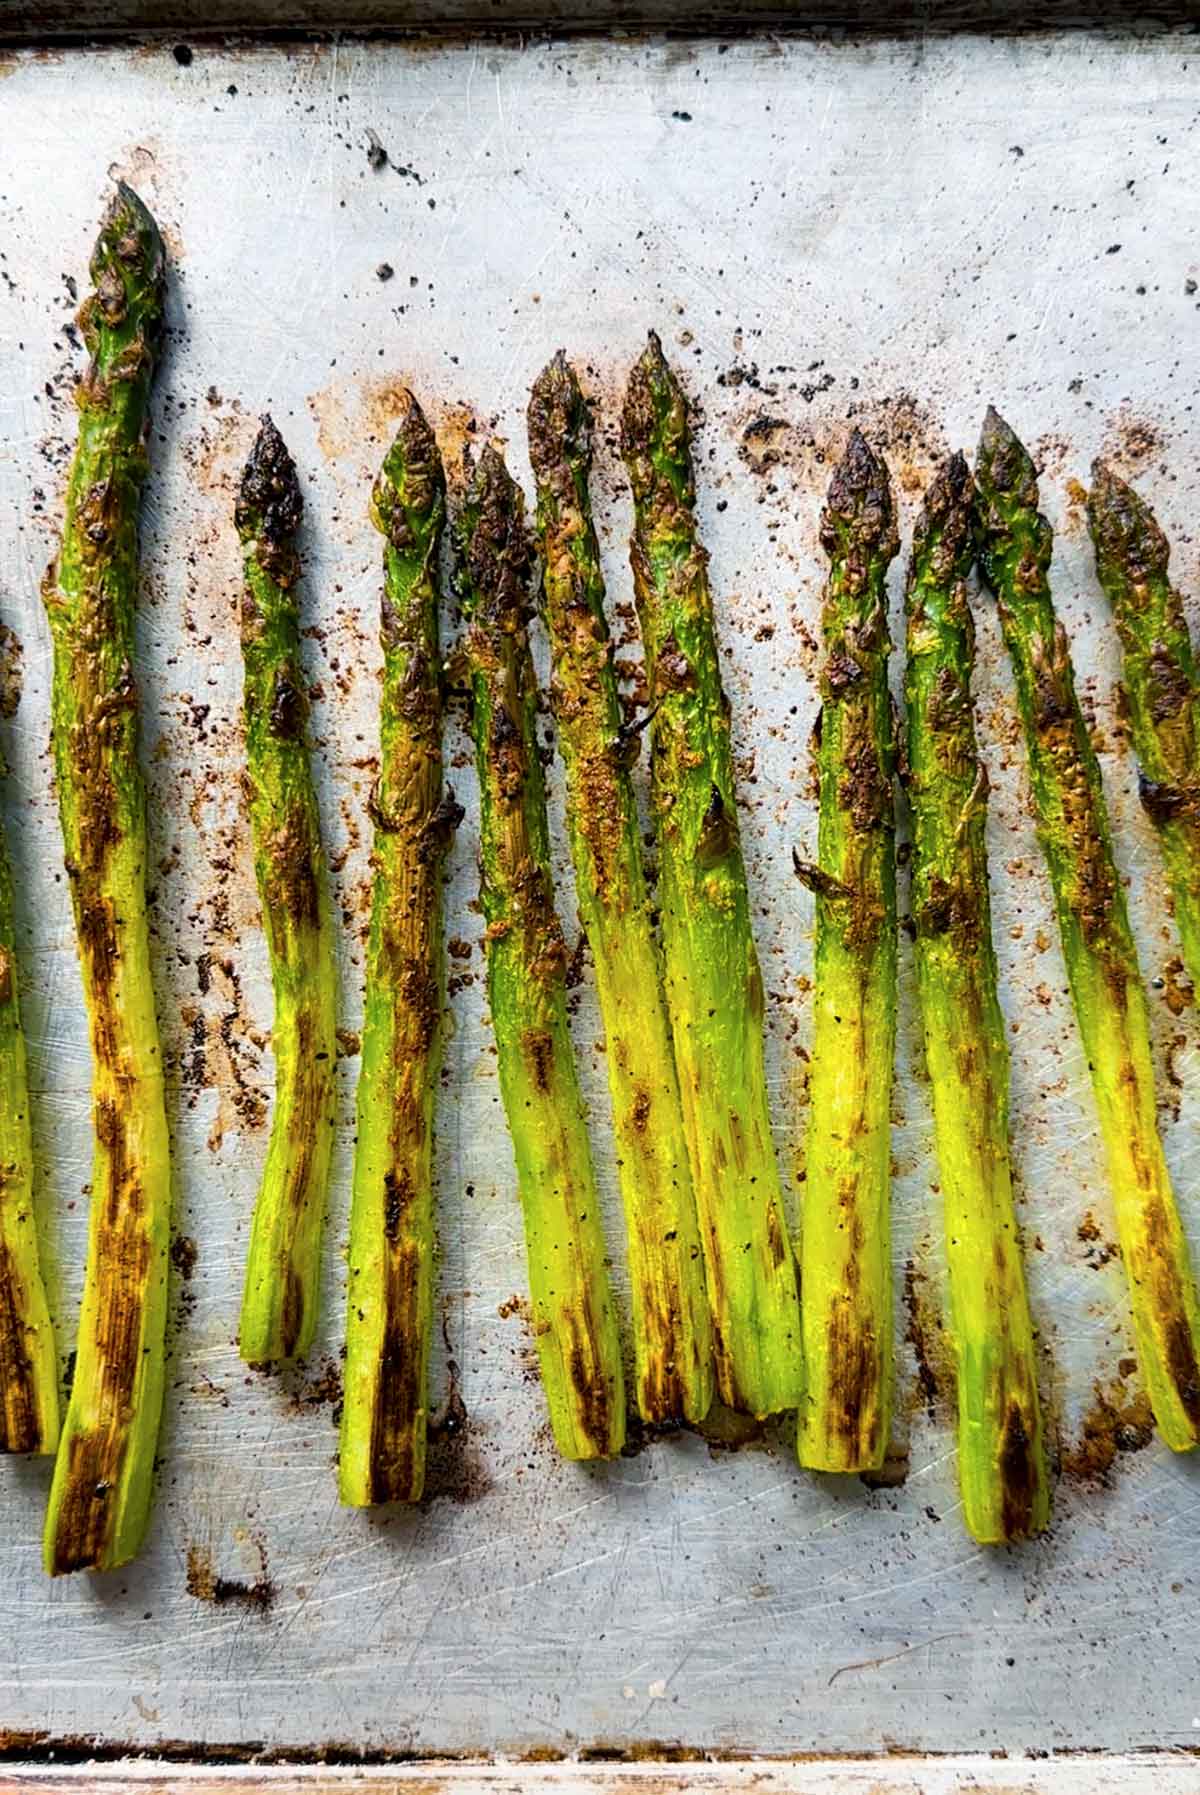 Roasted asparagus spears on a baking sheet showing how crispy the tips are and the browning from roasting.